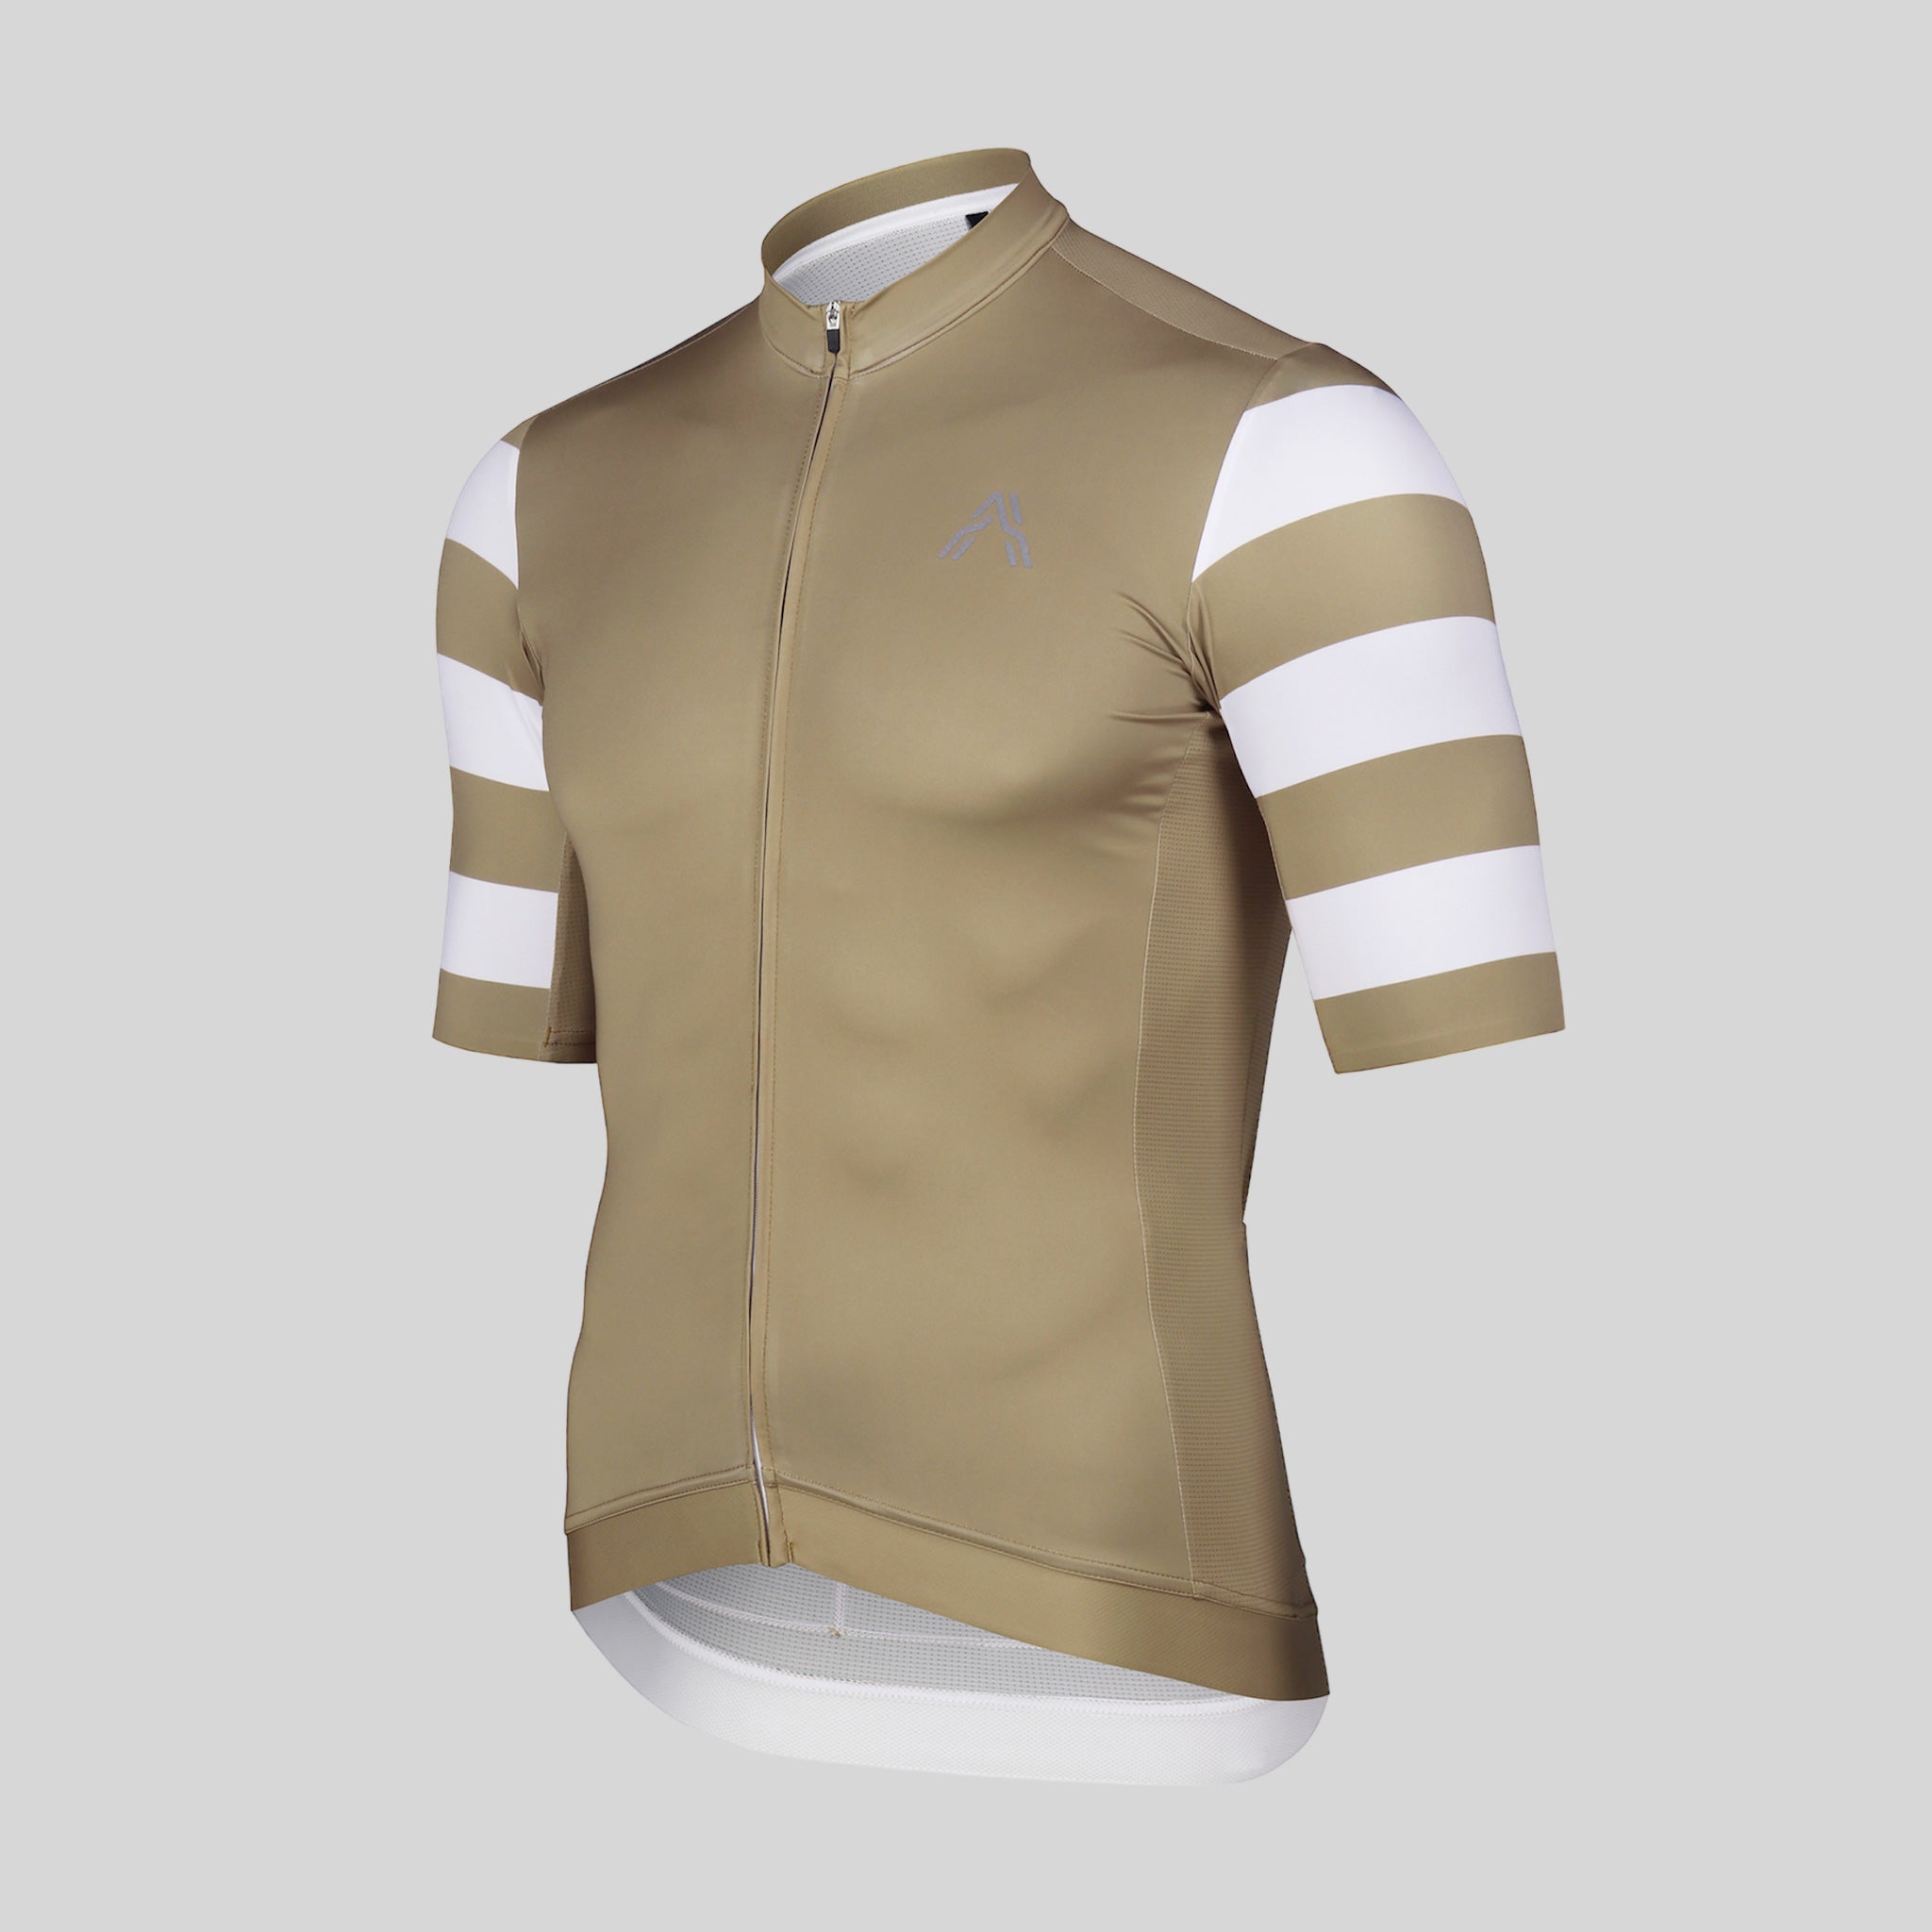 Ascender Cycling Club | Swiss Cycling Apparel Minimalist & Sustainable